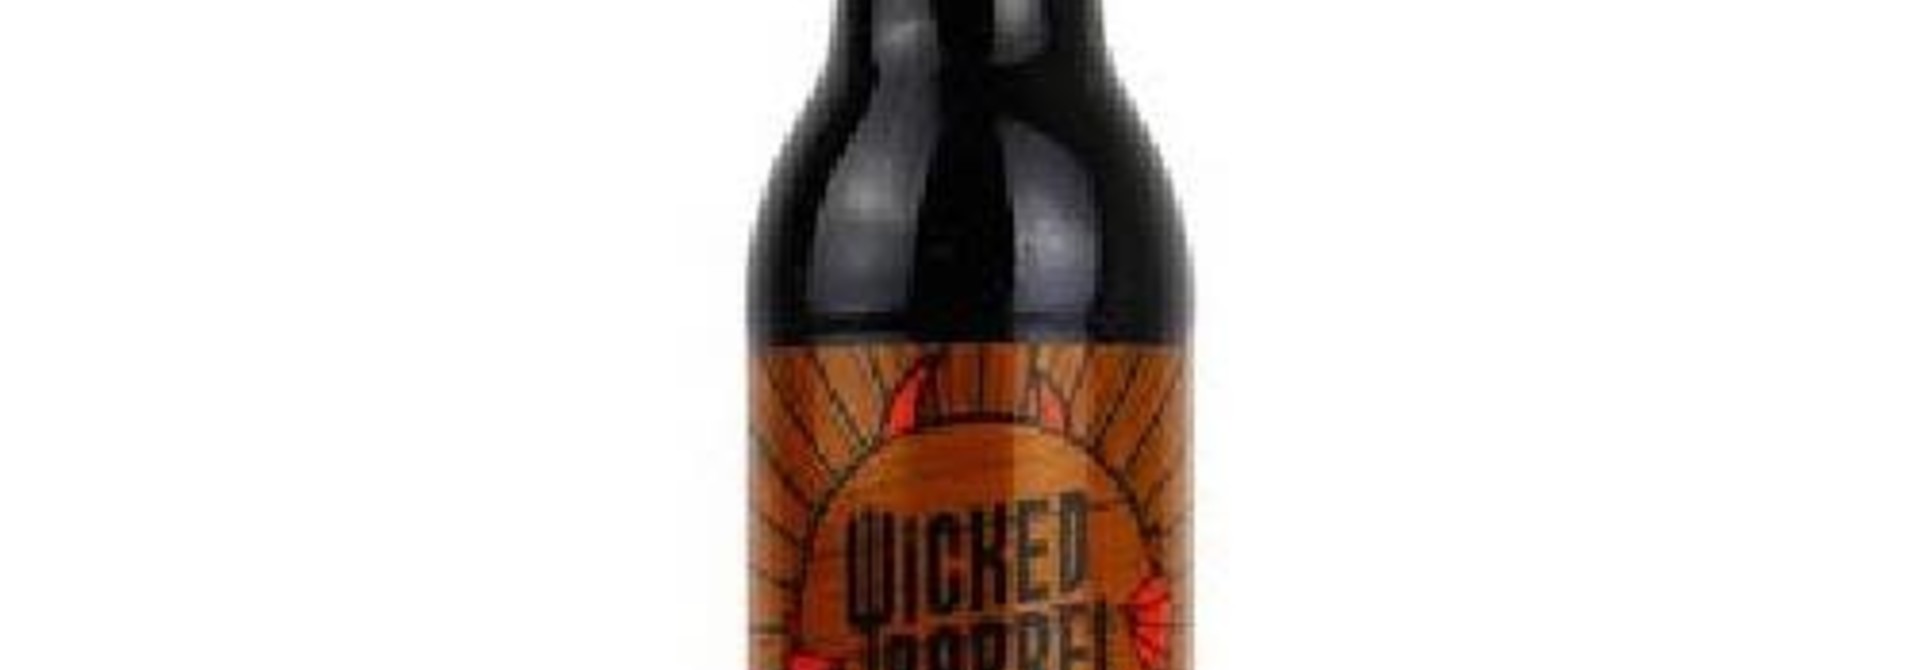 Wicked Barrel Red Wax Staves Imperial Stout 10.5%